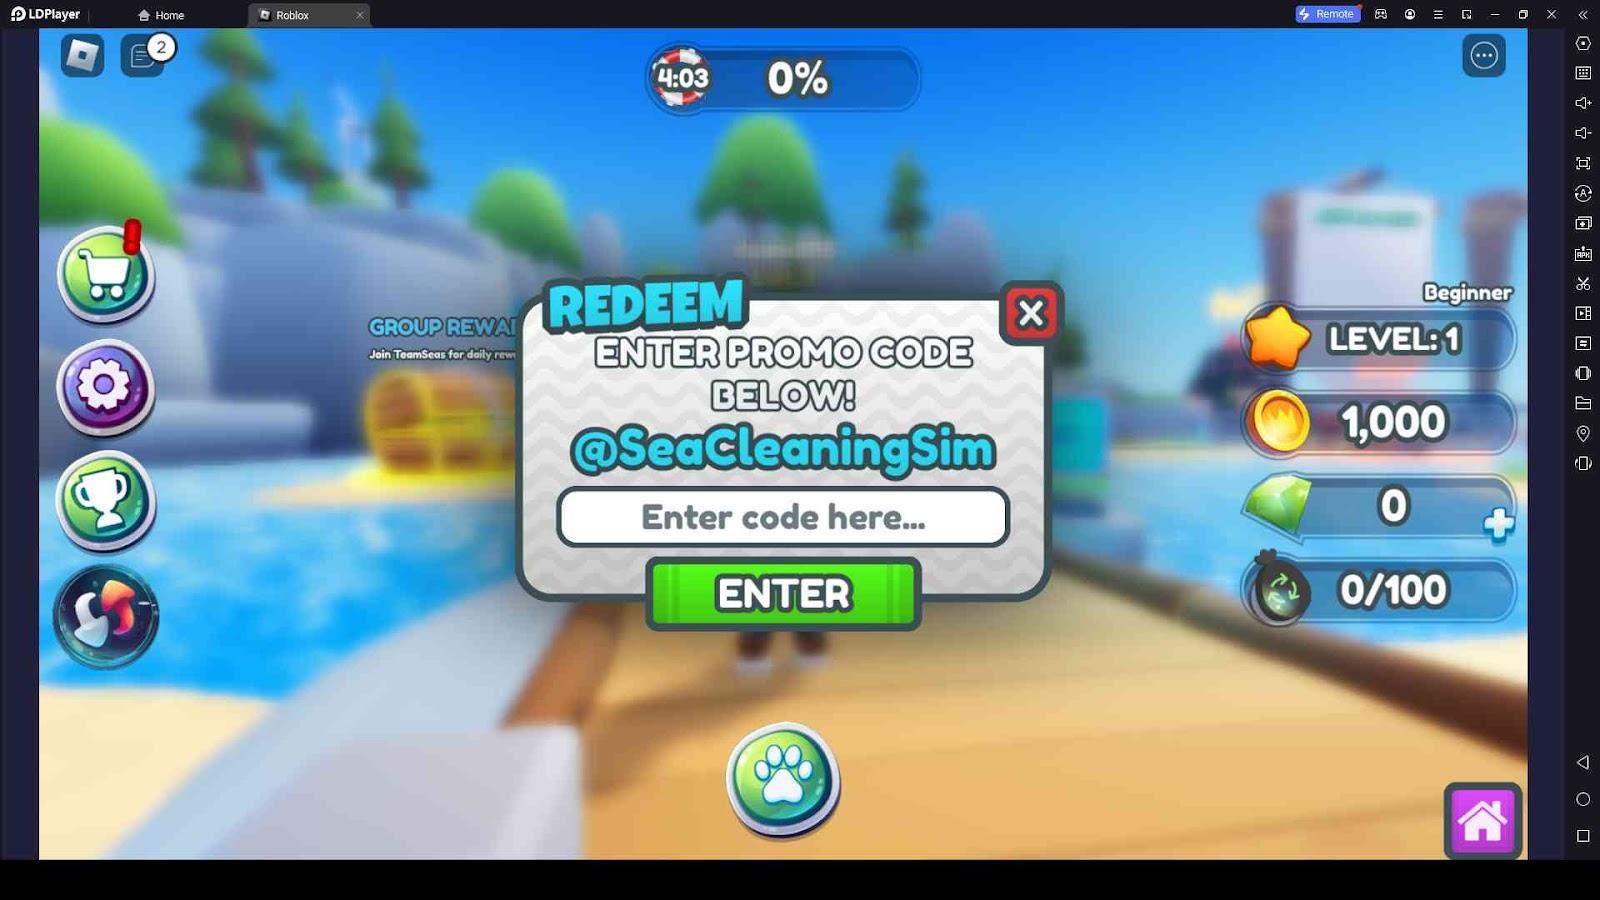 Sea Cleaning Simulator codes – free boosts, currency, and more